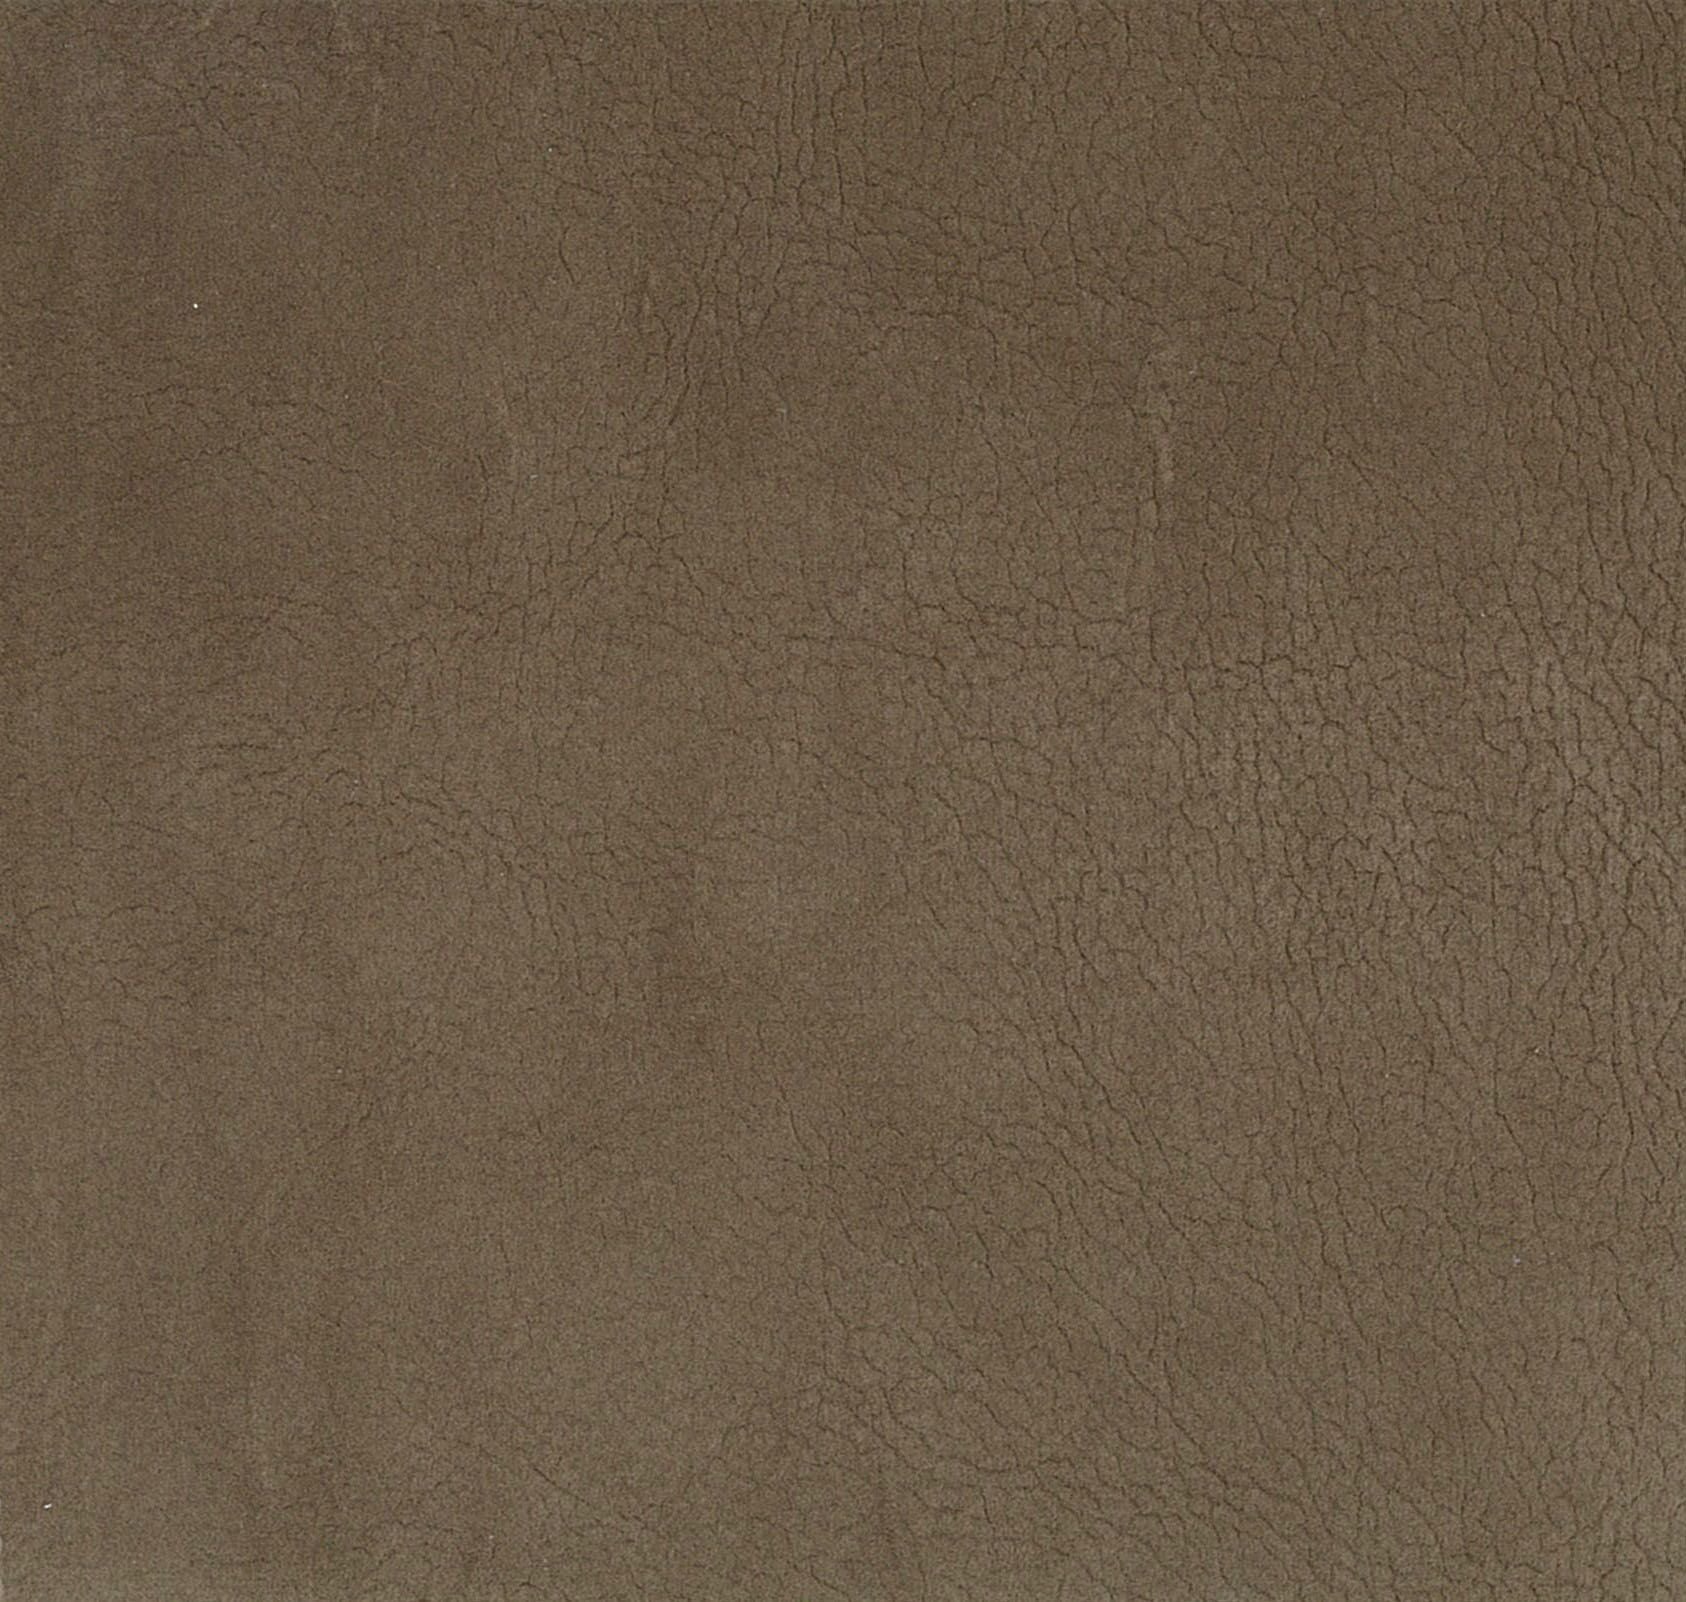 Georgia Suede fabric in canyon color - pattern number H6 37475937 - by Scalamandre in the Old World Weavers collection